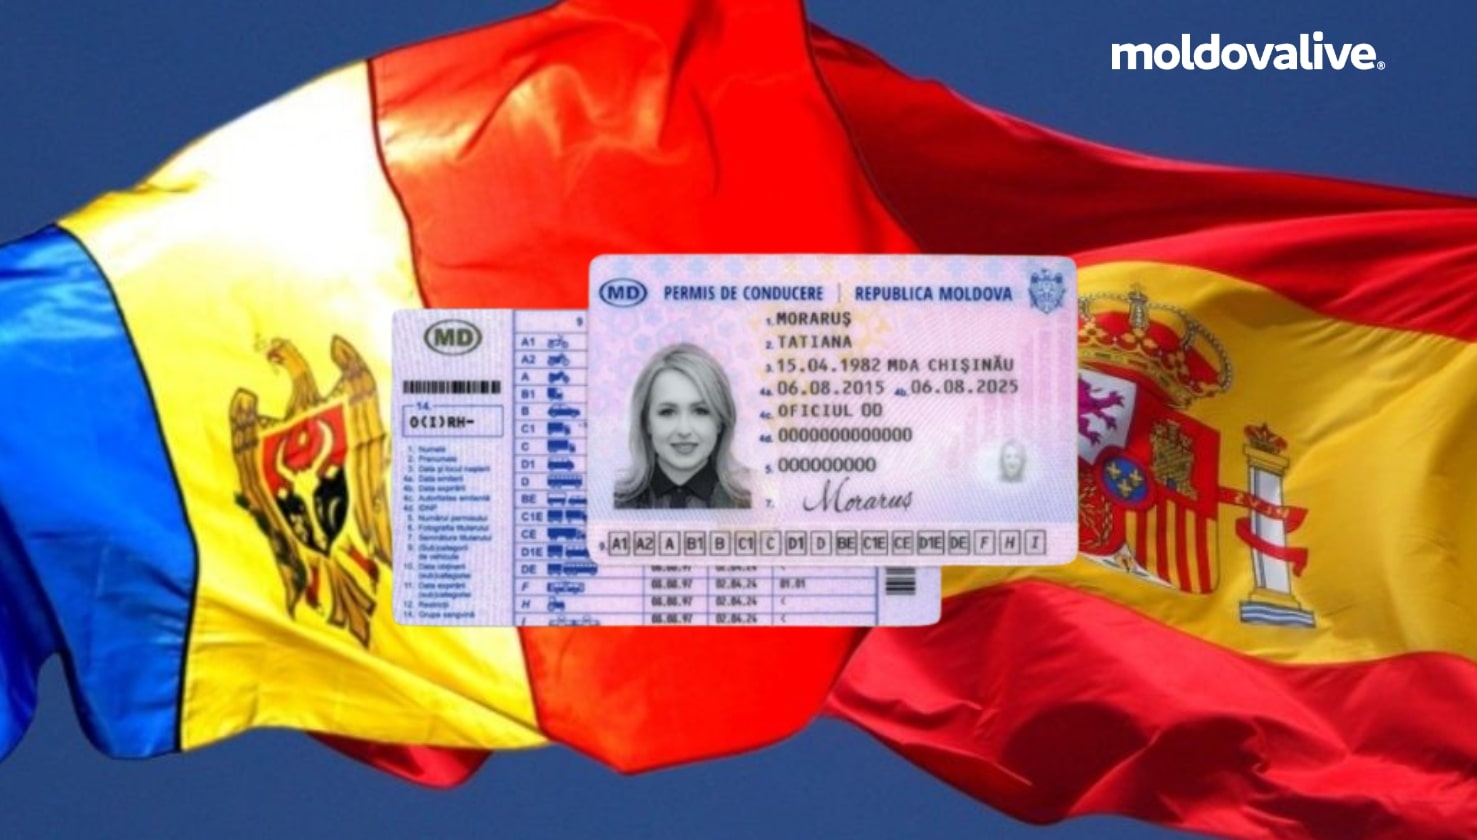 Driving licenses issued in the Republic of Moldova and Spain will be mutually recognized